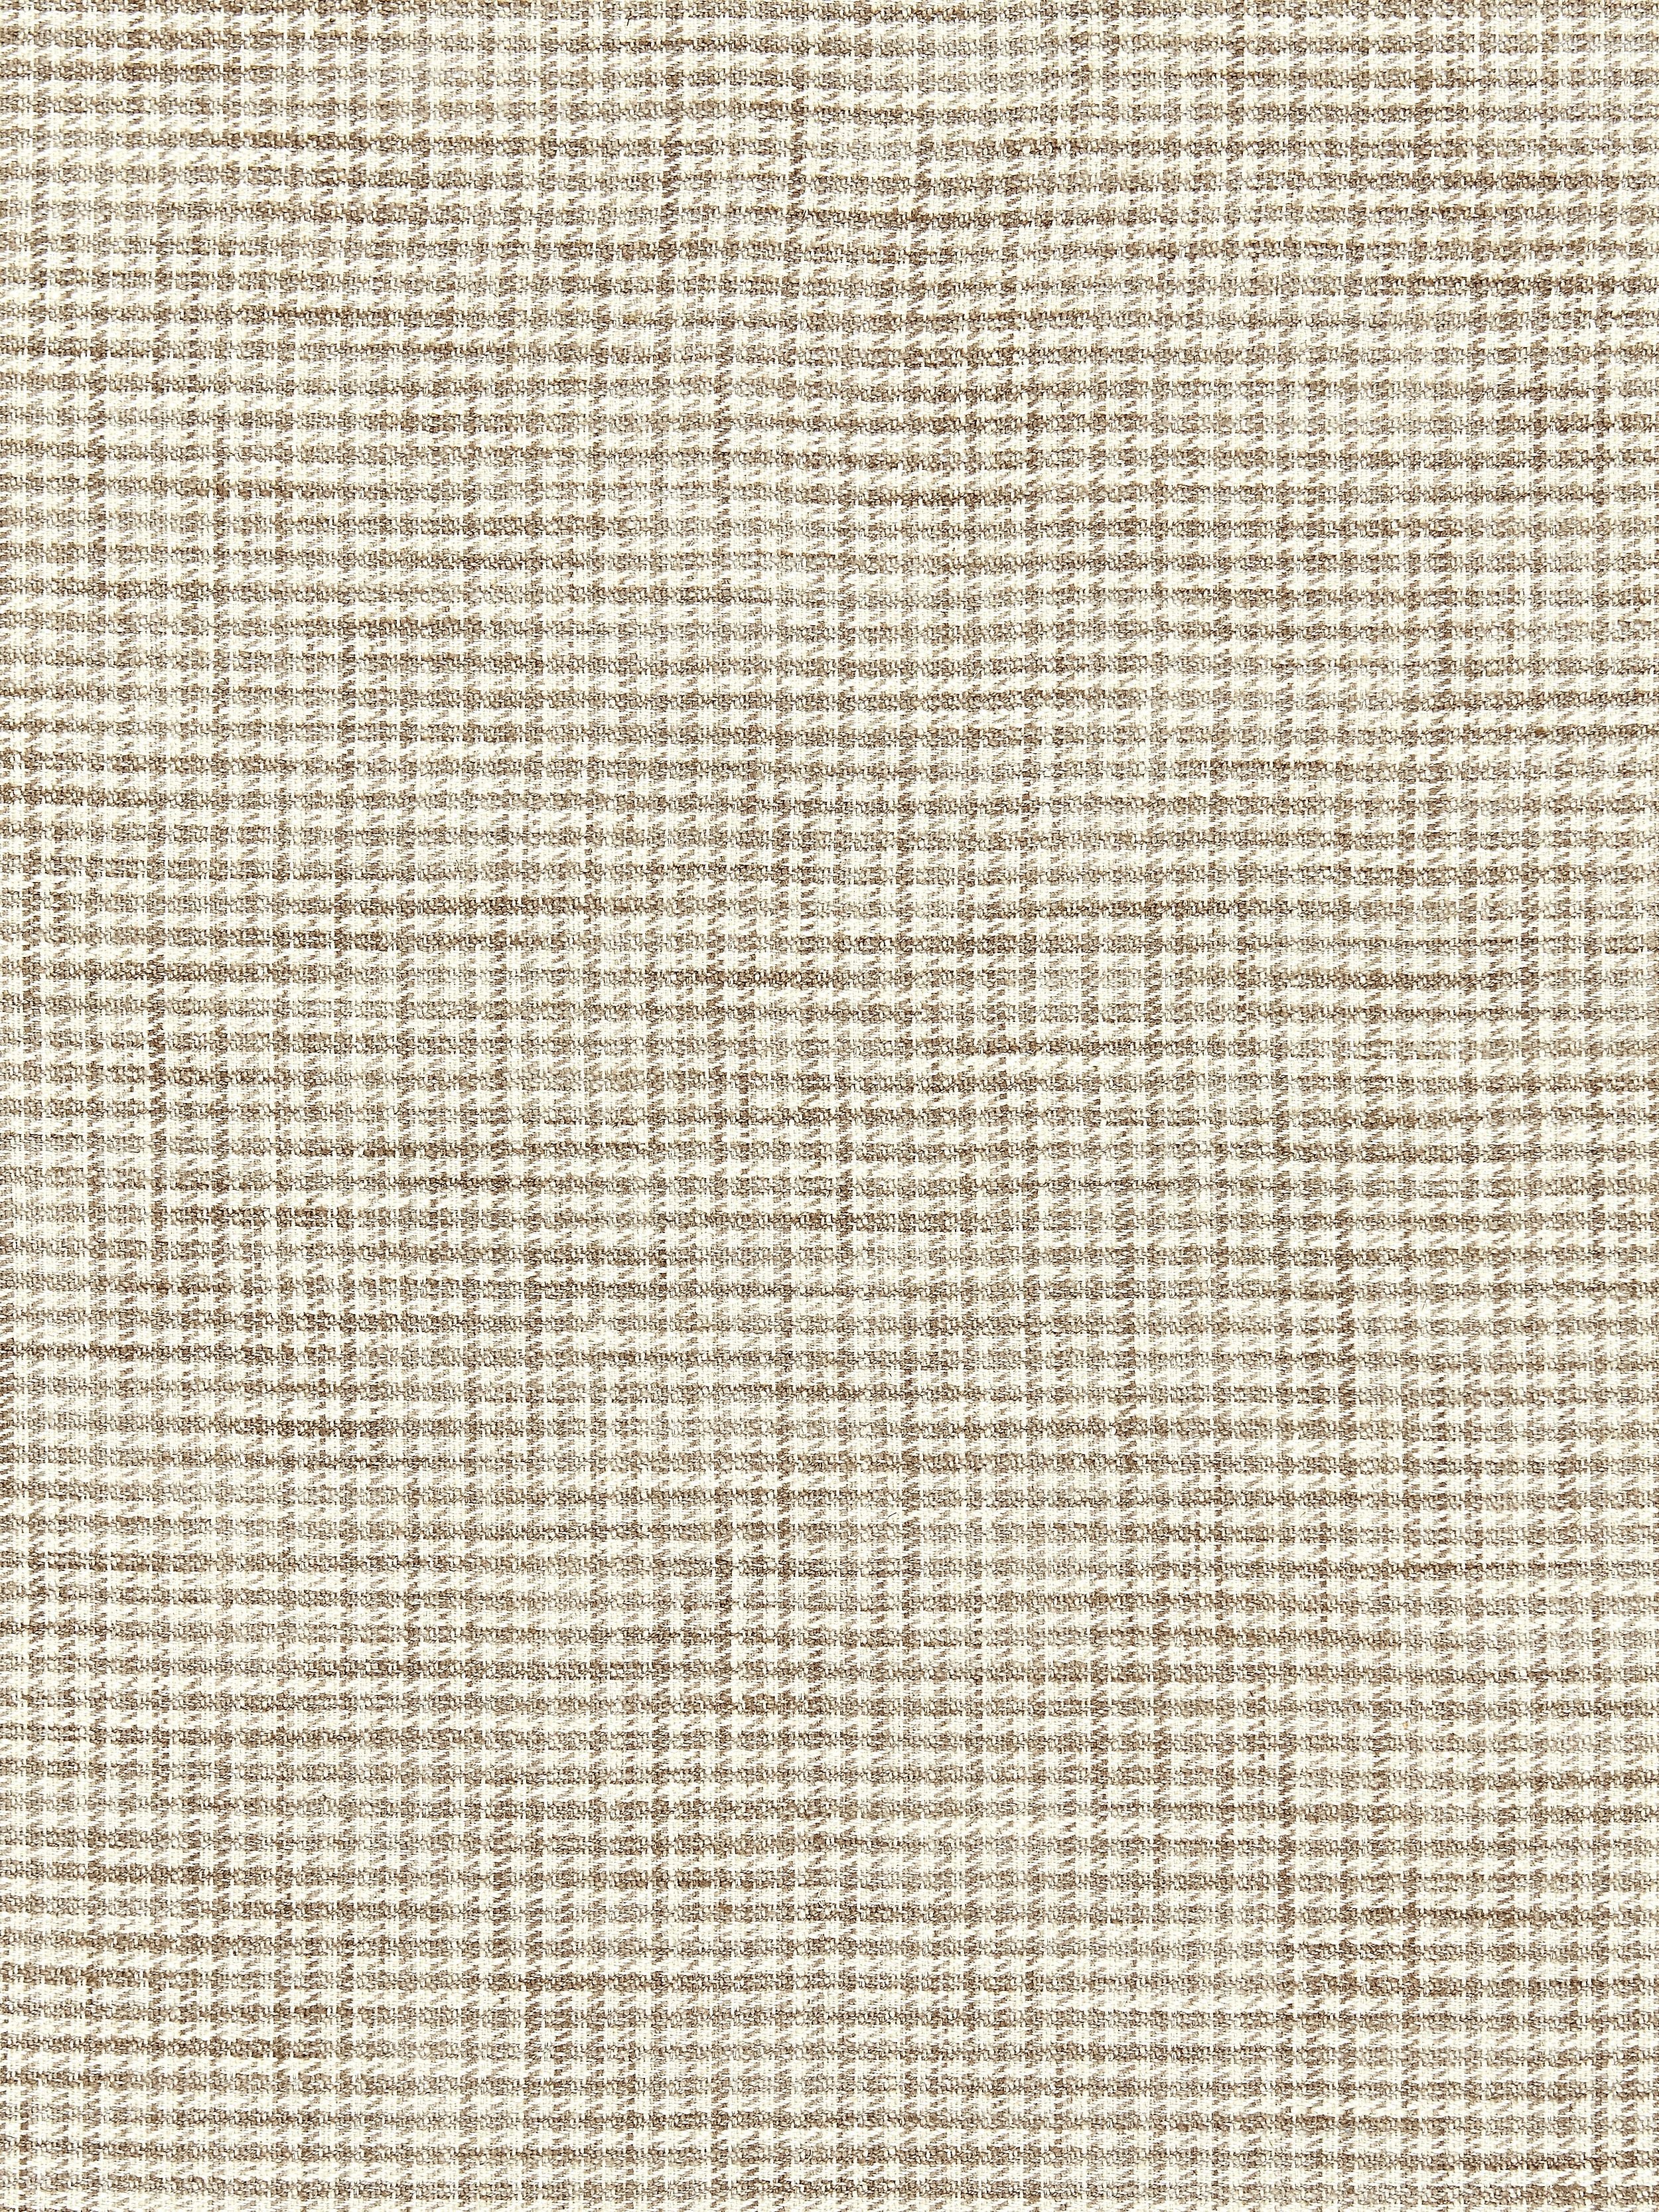 Banbury Strie Check fabric in flax color - pattern number SC 000127099 - by Scalamandre in the Scalamandre Fabrics Book 1 collection